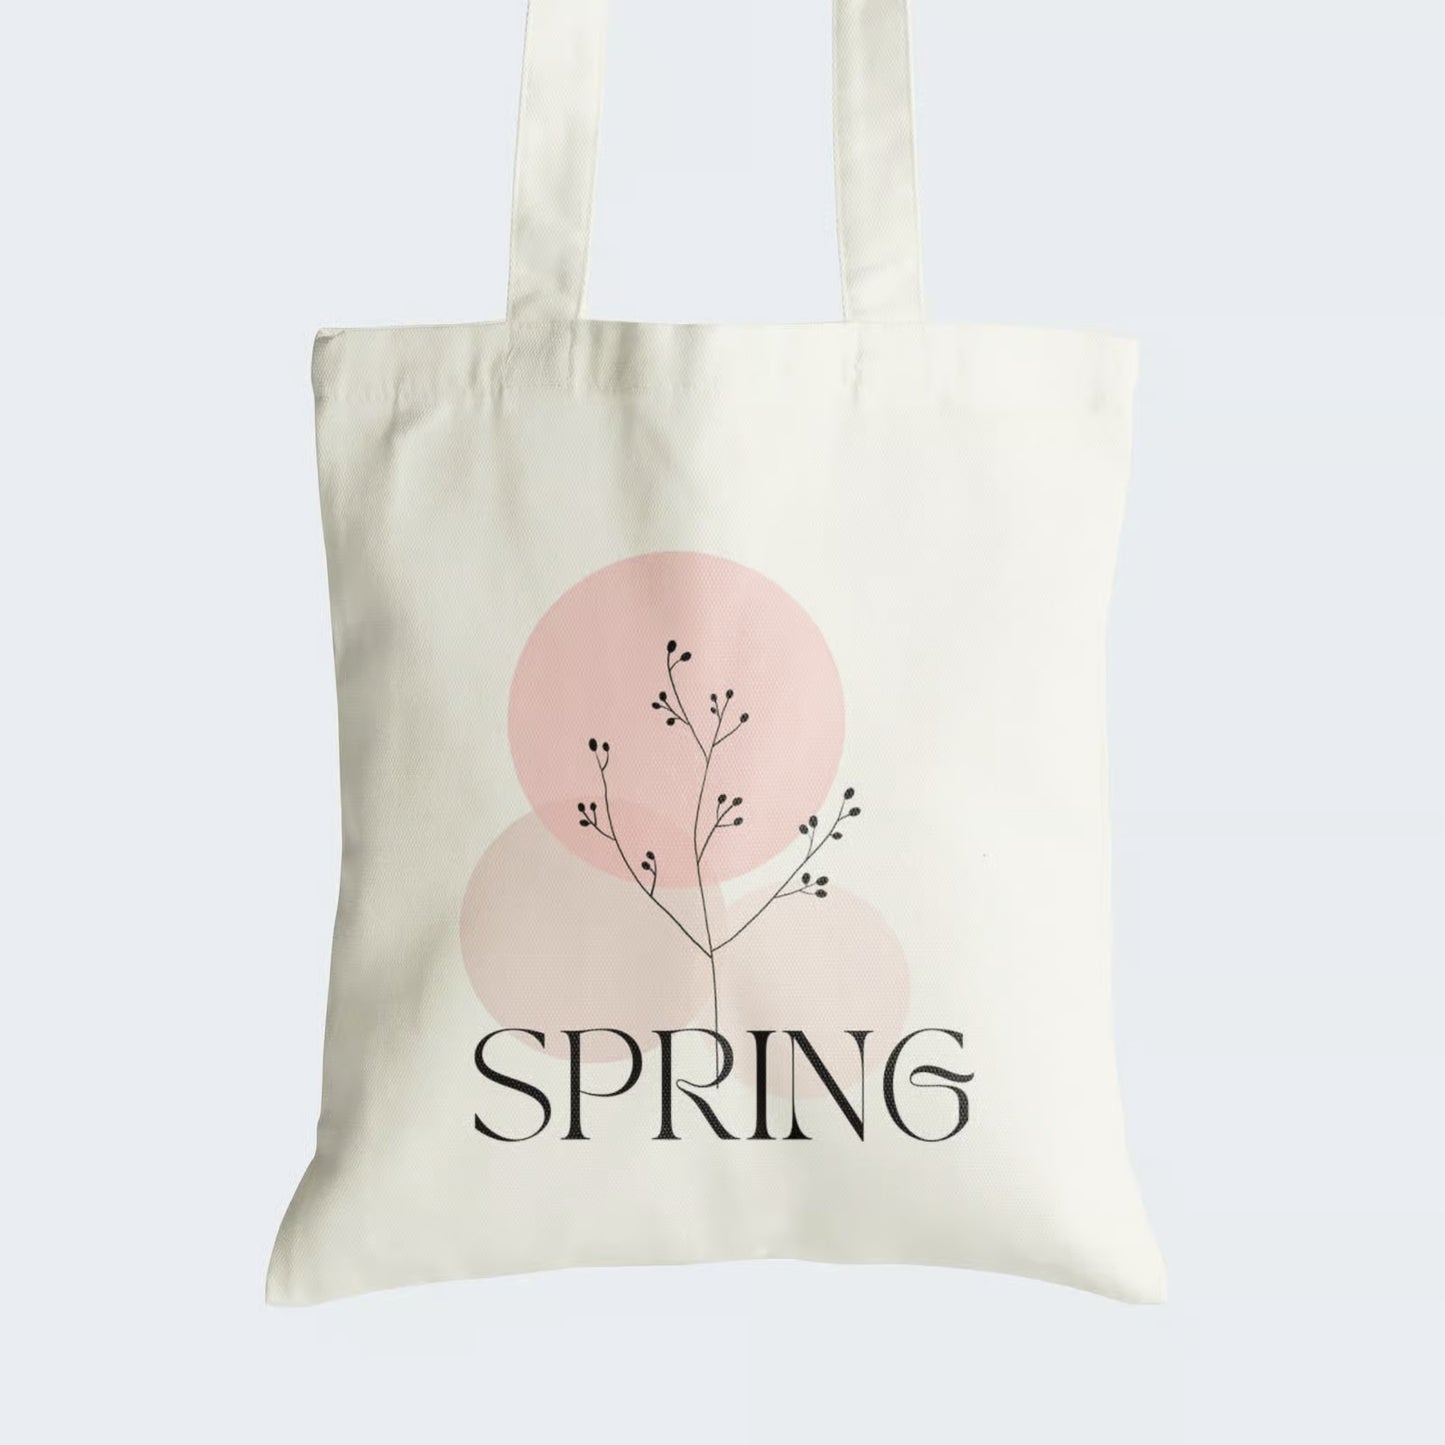 Elevate your style with our "SPRING" Cotton Canvas Tote Bag, a minimalistic masterpiece. This tote showcases the word "SPRING" in a sleek, elegant font, accompanied by a simple outline of a small plant with delicate leaves. Crafted for durability and style, it includes a secure zipper closure, ideal for daily use or making a subtle statement. Embrace the beauty of nature and the rejuvenation of the season with our "SPRING" Cotton Canvas Tote Bag. Order yours today!